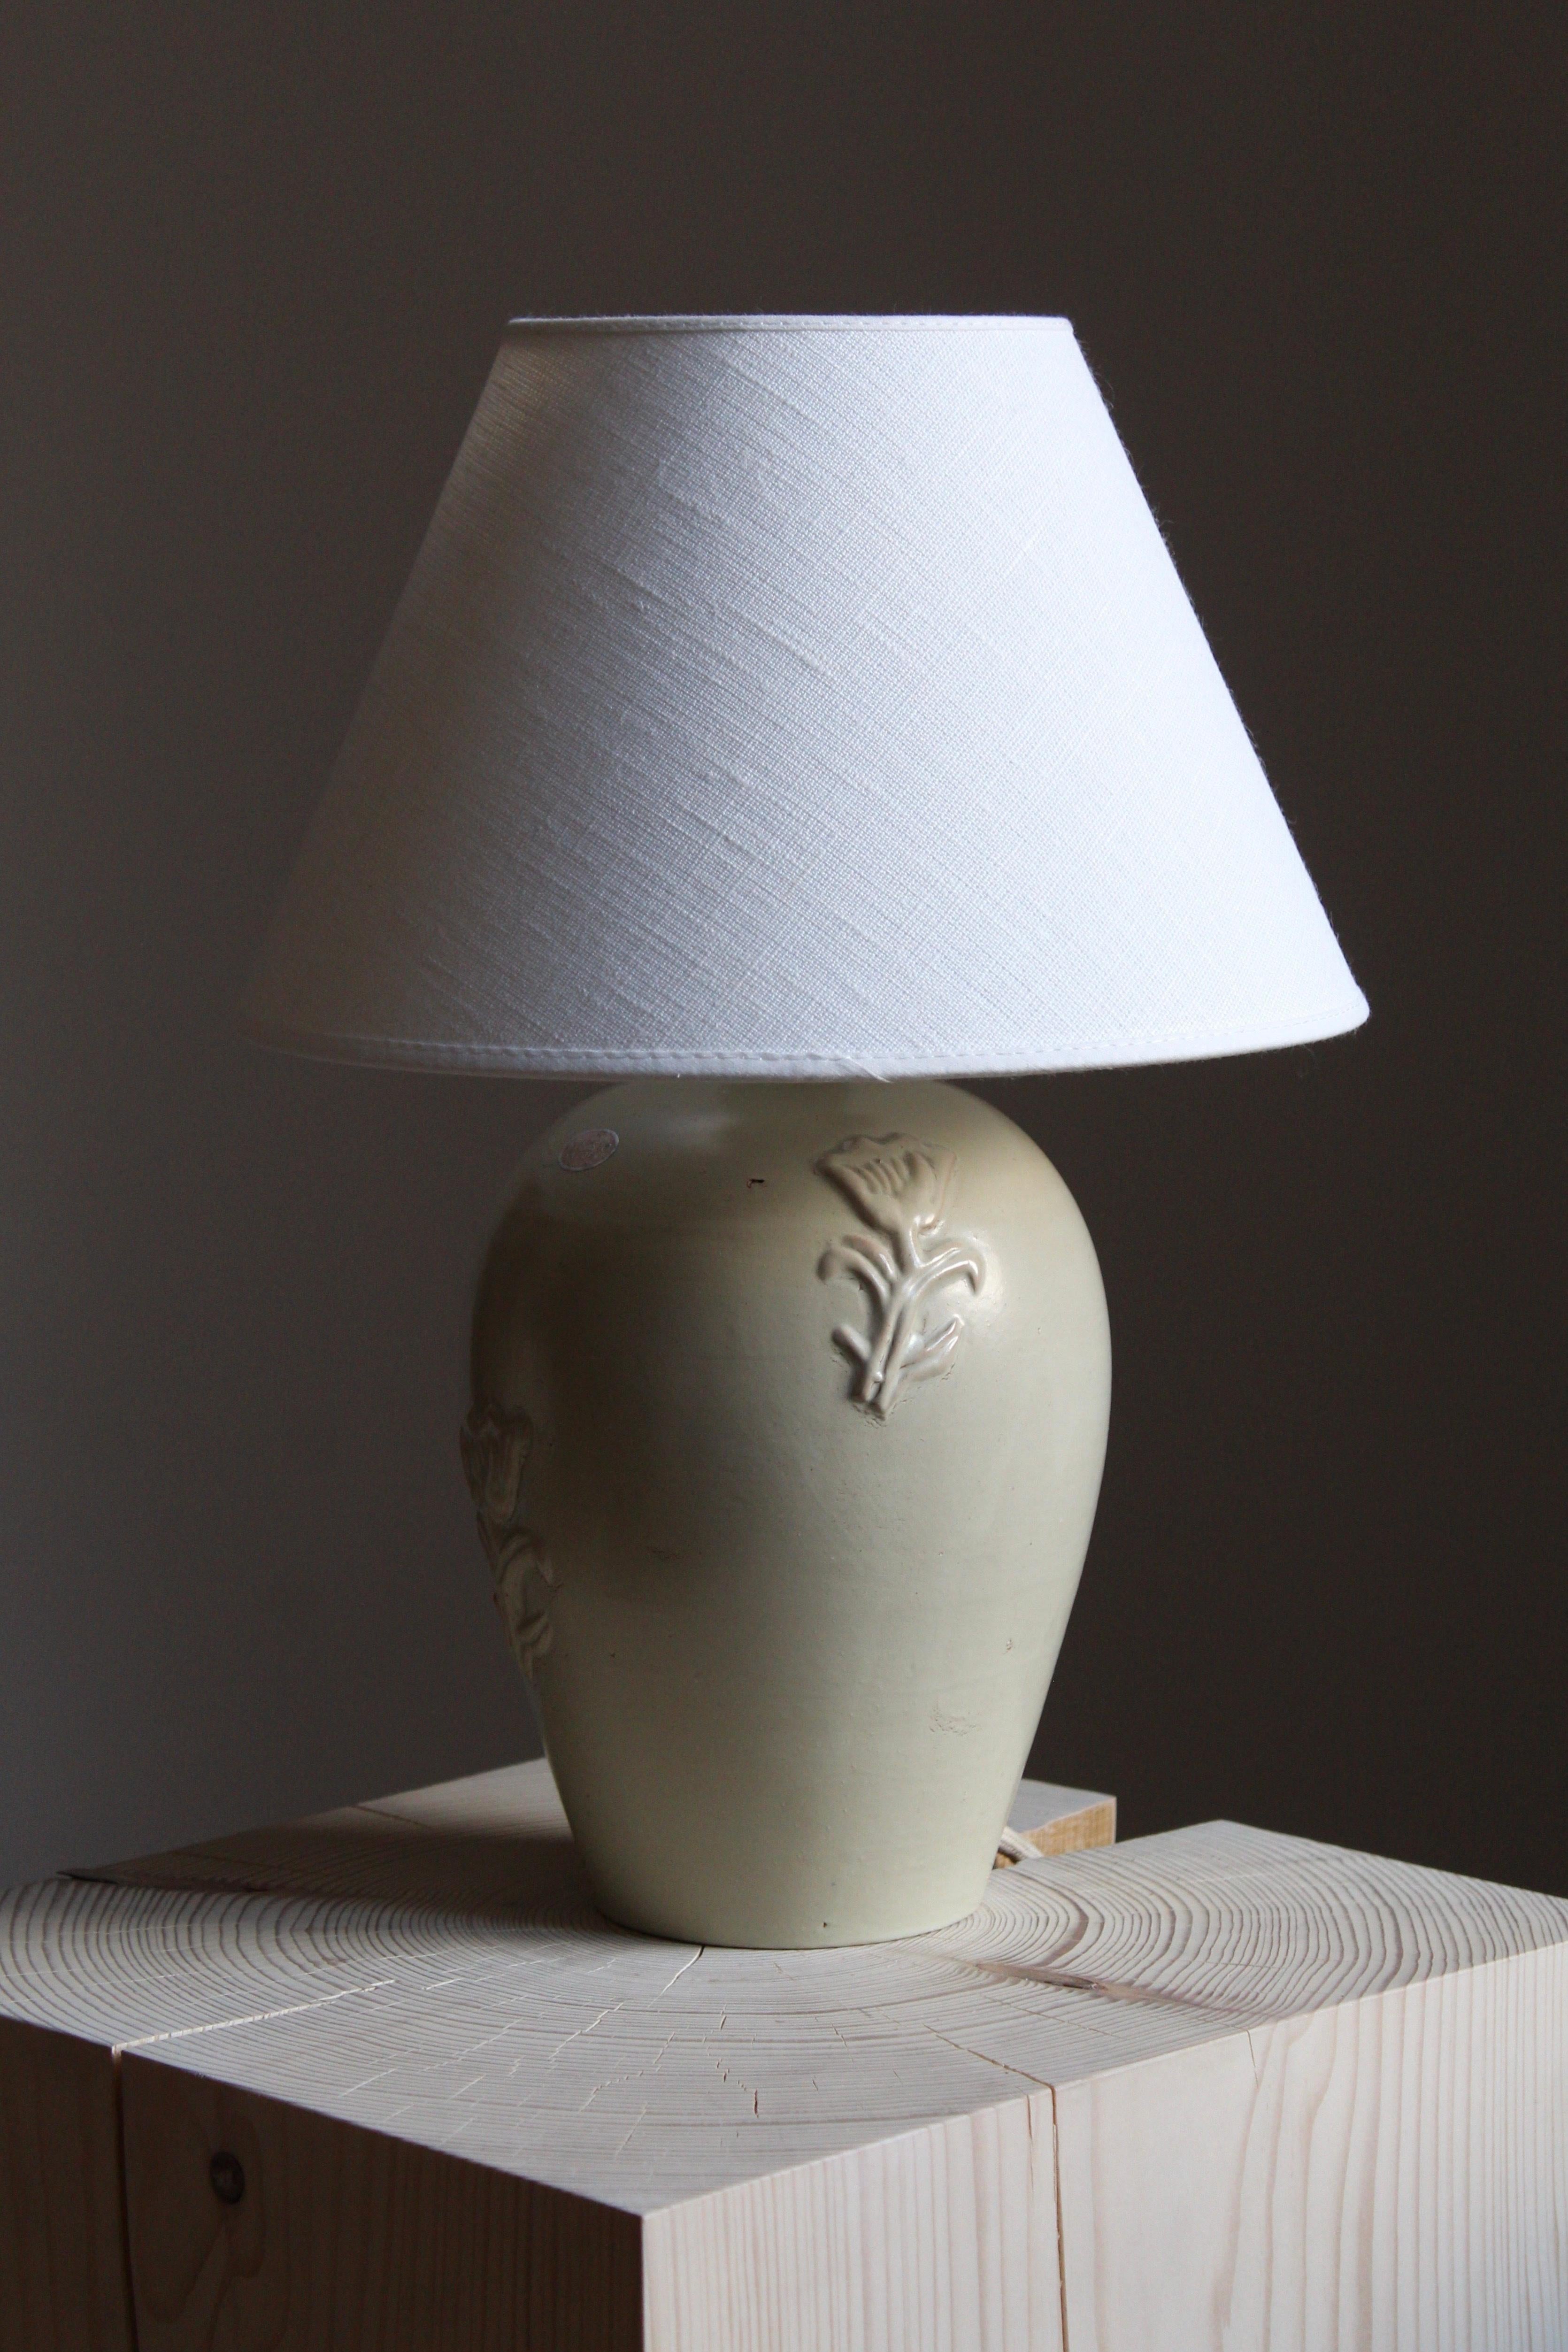 A table lamp designed by Jerk Werkmäster. Produced by Nittsjö, Sweden, 1950s. Stamped. Lampshade not included.

Glaze features a beige-grey color.

Other designers of the period include Axel Salto, Paavo Tynell, Lisa Johansson-Pape, Carl-Harry